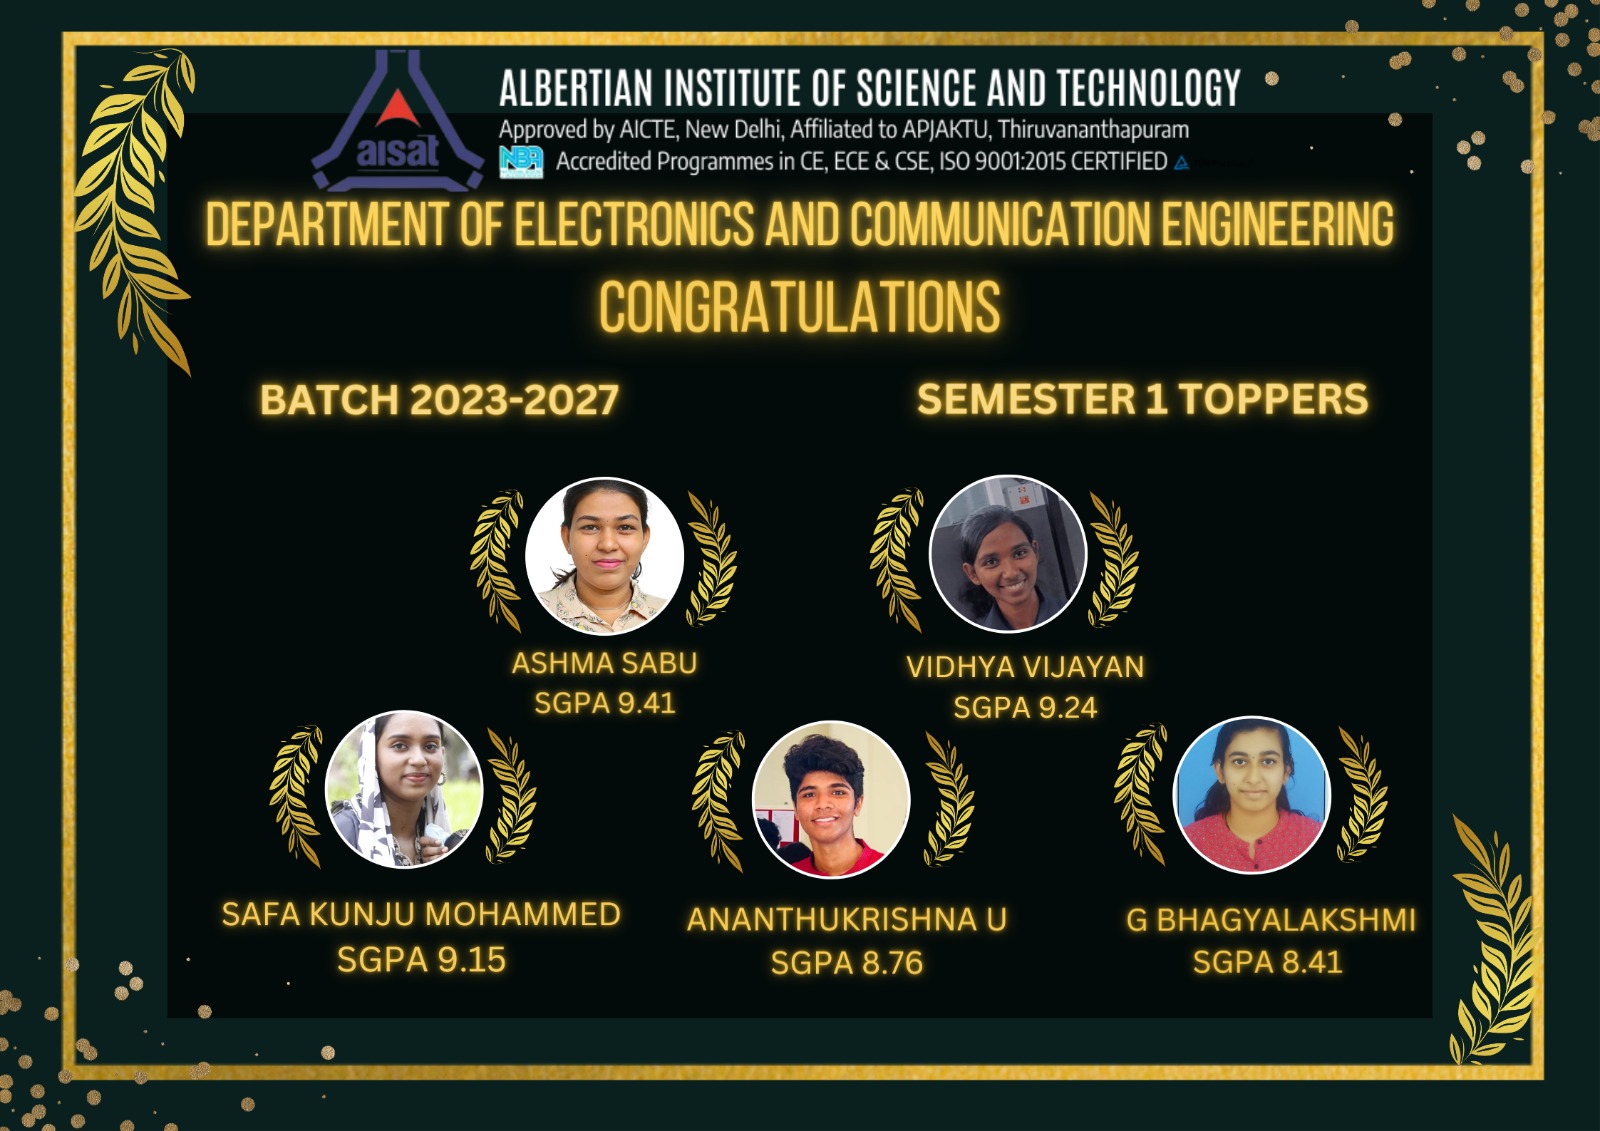 Congratulations to the APJAKTU Toppers of S1 ECE